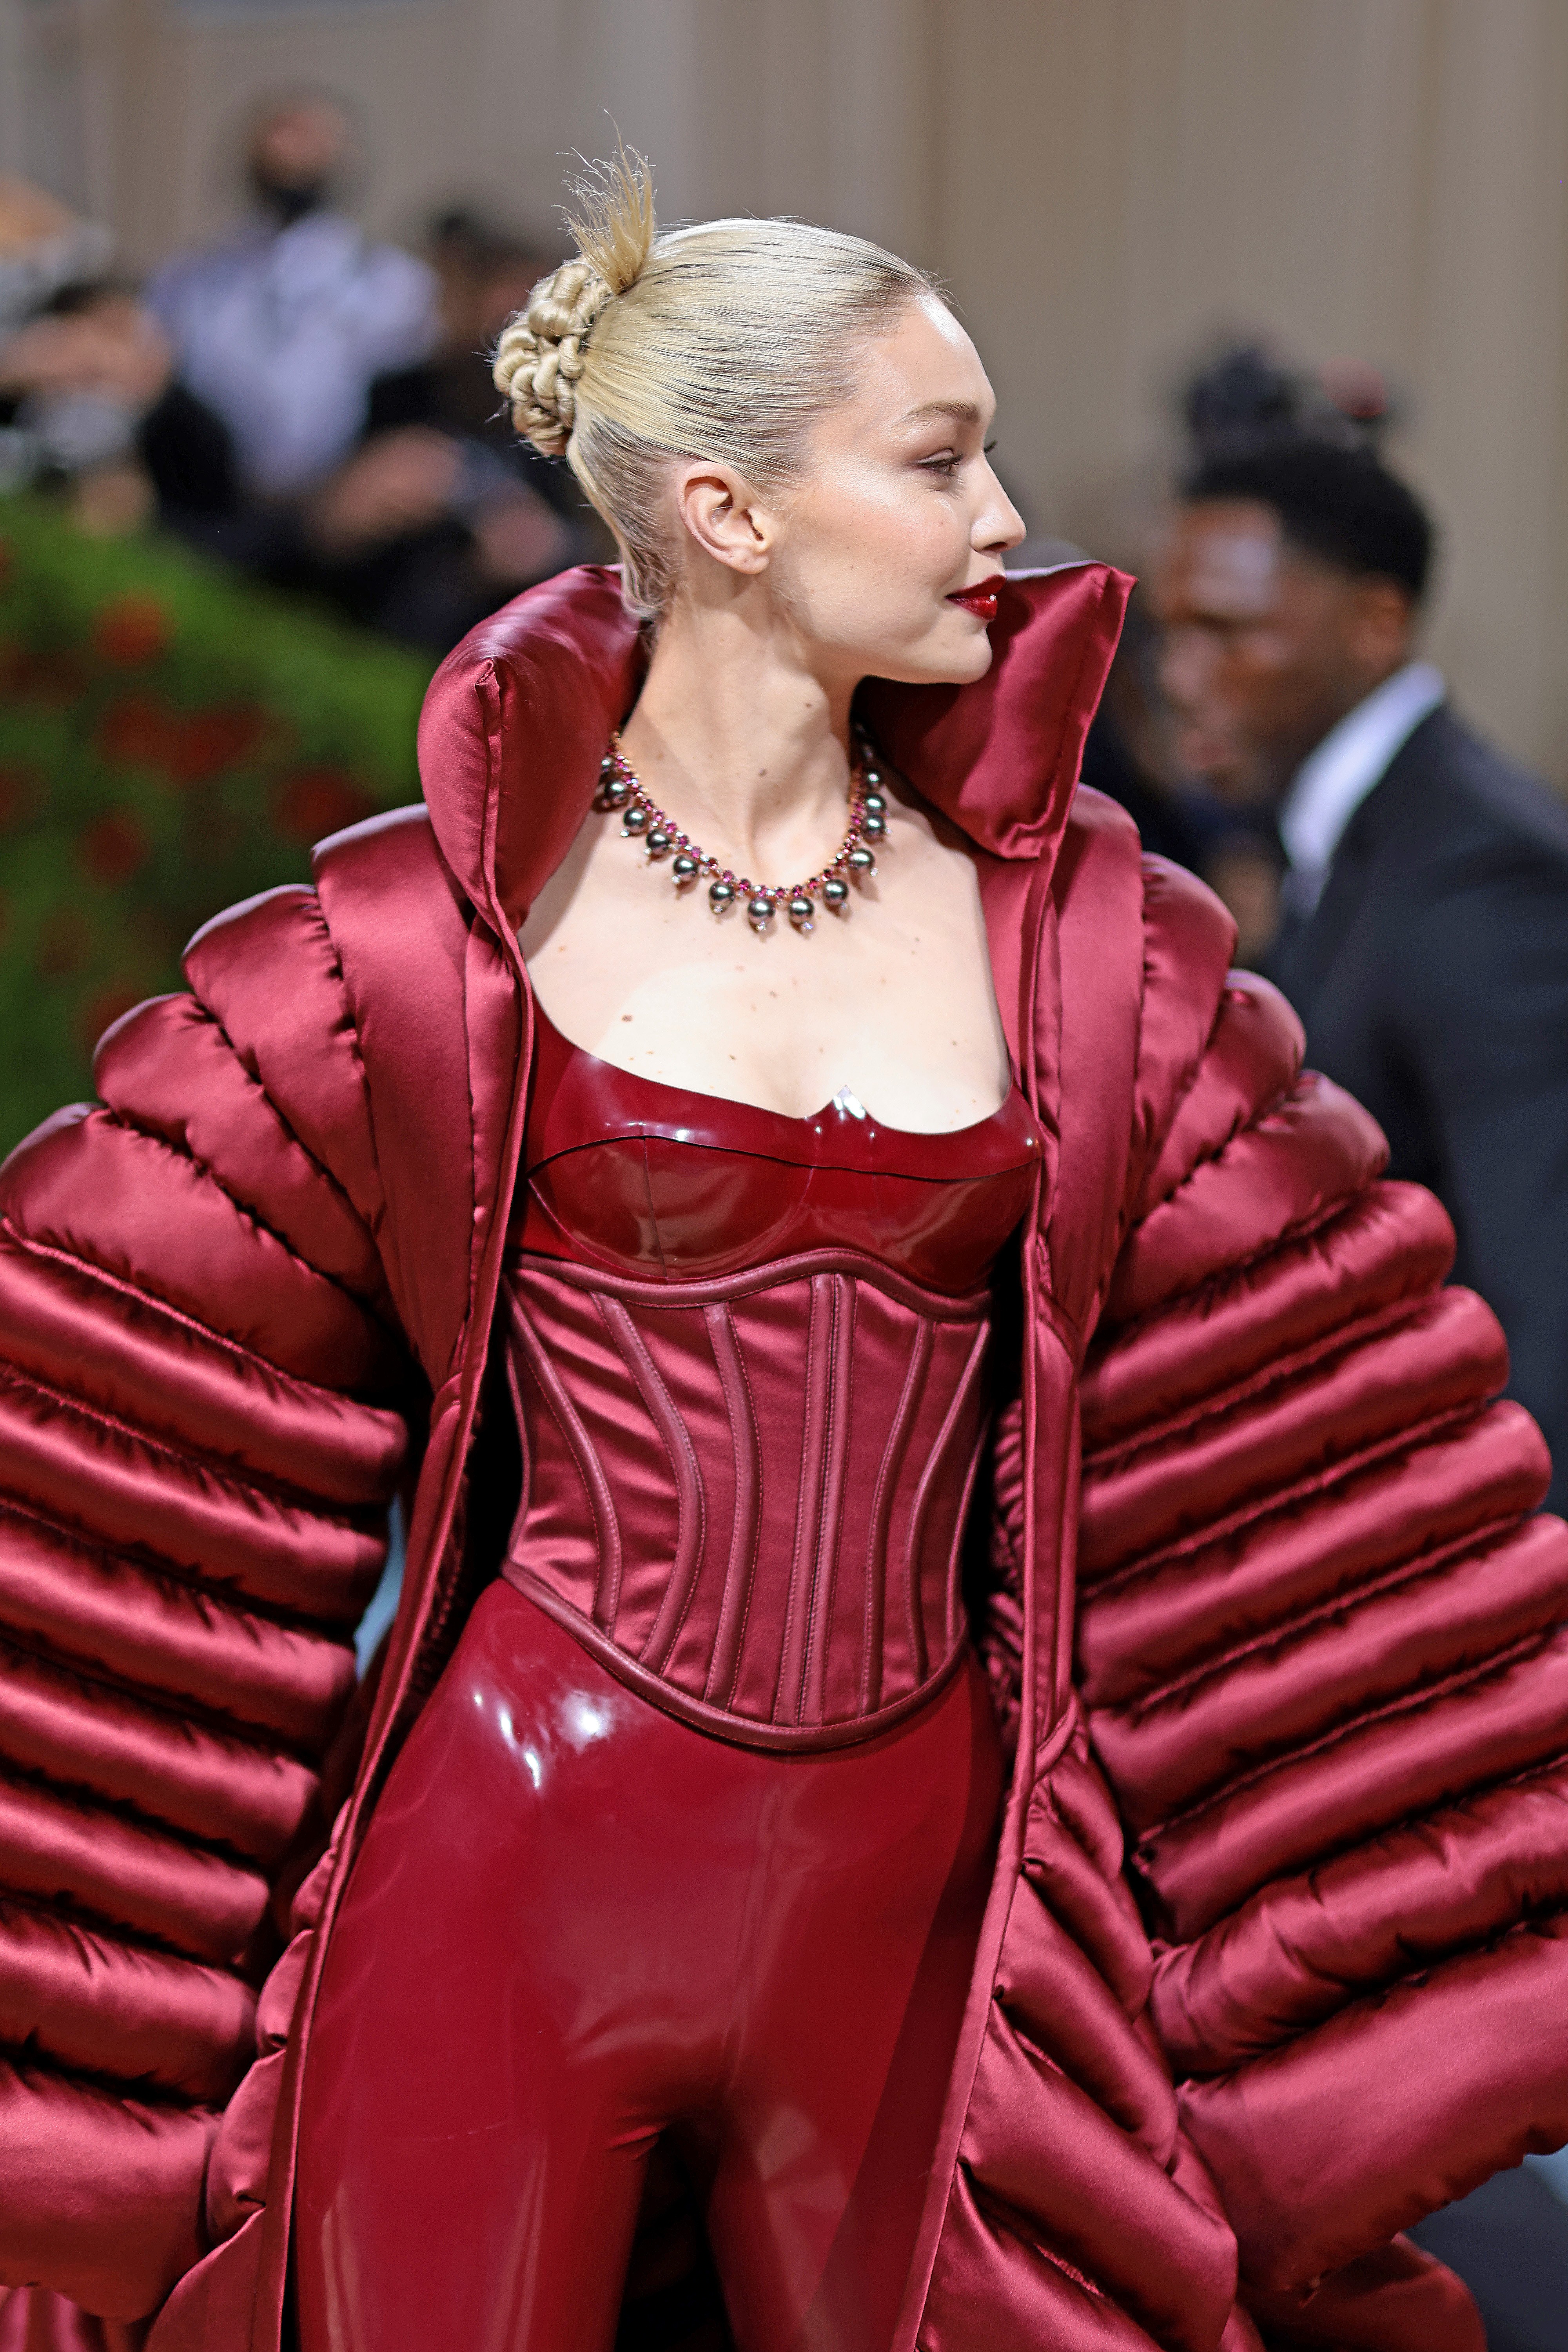 NEW YORK, NEW YORK - MAY 02: Gigi Hadid attends The 2022 Met Gala Celebrating "In America: An Anthology of Fashion" at The Metropolitan Museum of Art on May 02, 2022 in New York City. (Photo by Dimitrios Kambouris/Getty Images for The Met Museum/Vogue) (Foto: Getty Images for The Met Museum/)